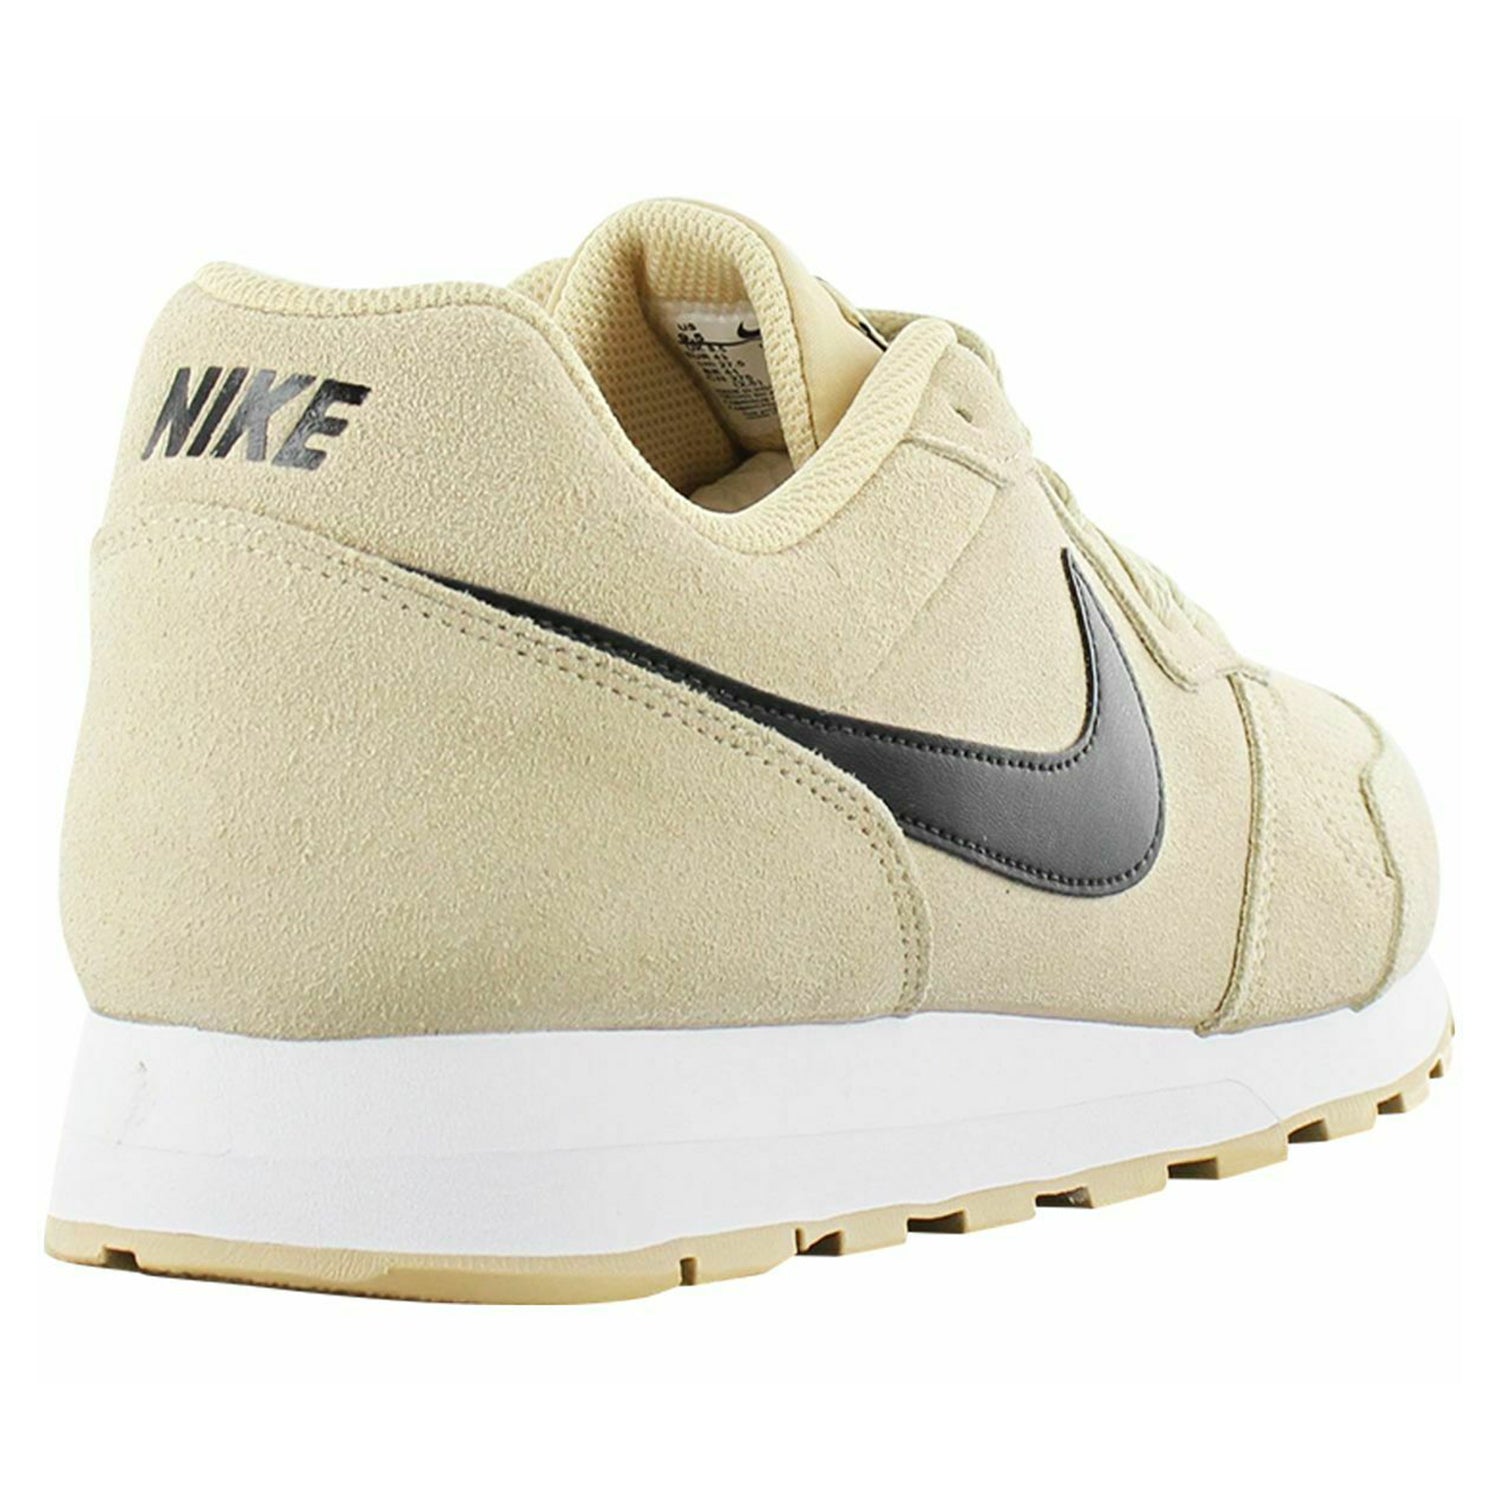 Nike Md Runner 2 Suede Mens Style : Aq9211-700